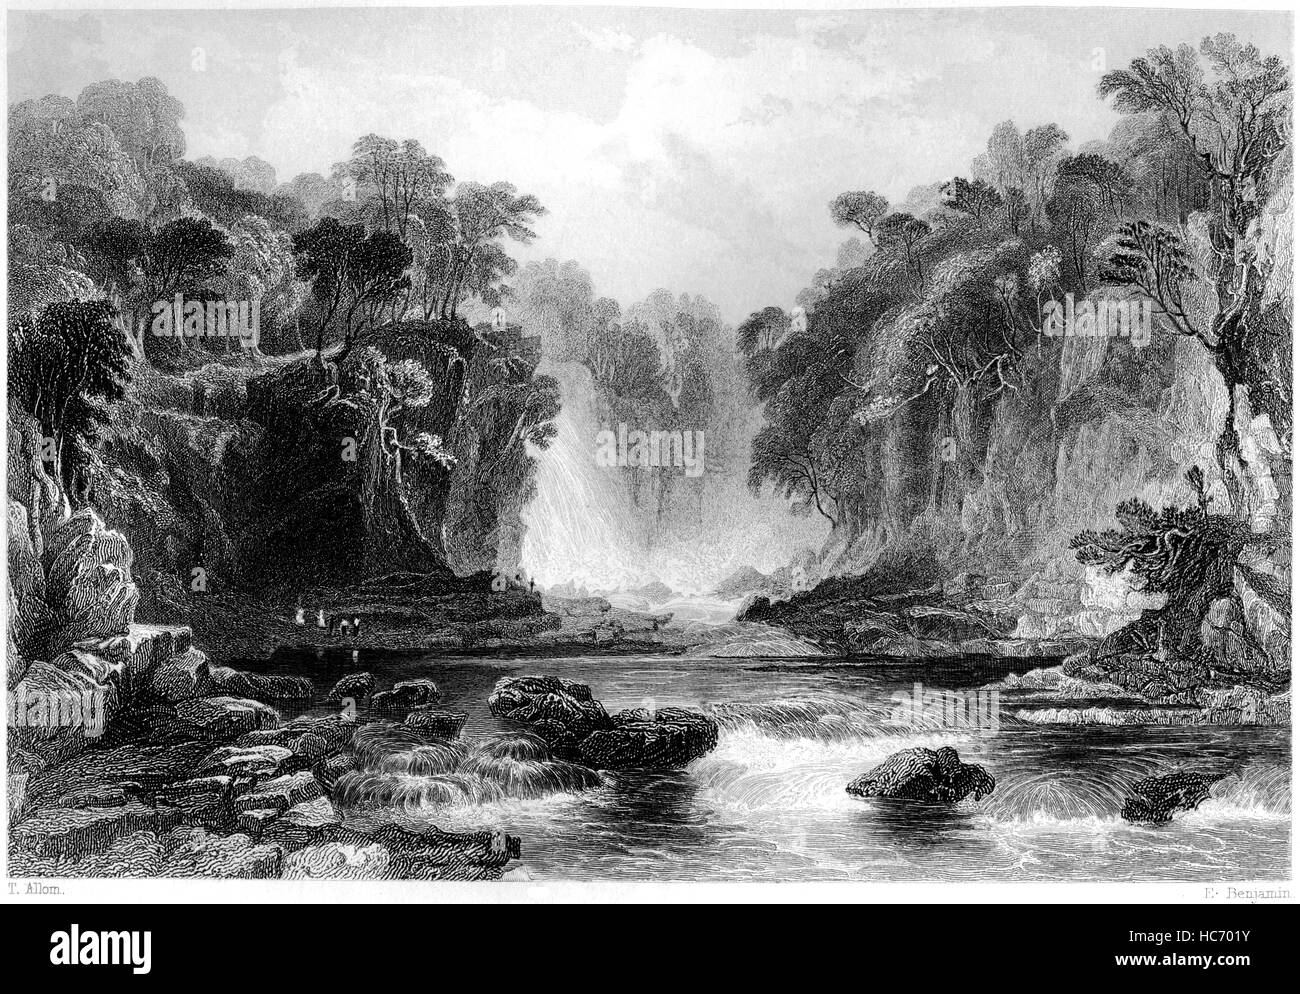 An engraving of Bonniton Lynn on the River Clyde scanned at high resolution from a book printed in 1859. Believed copyright free Stock Photo